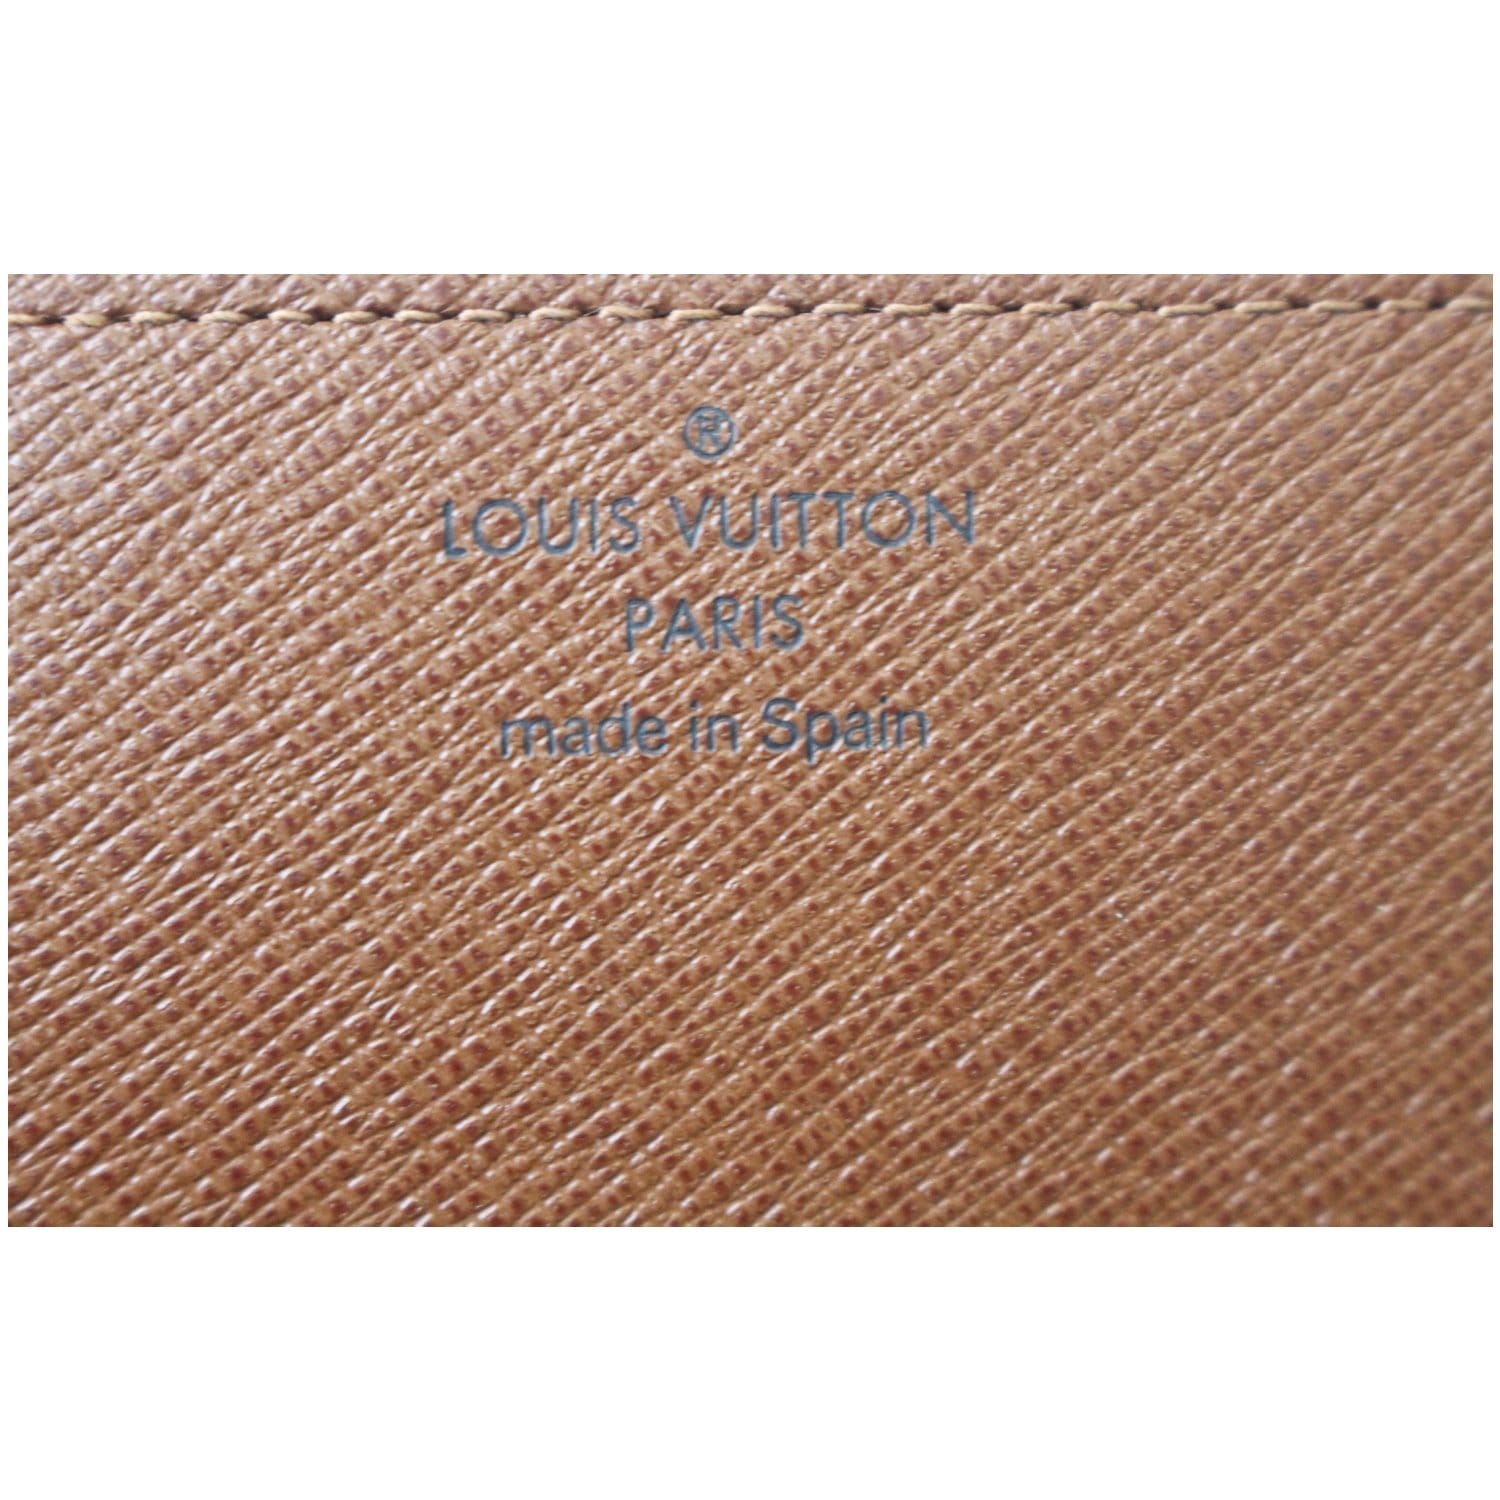 Louis Vuitton Envelope Business Card Holder in Coated Canvas with Gold-tone  - US